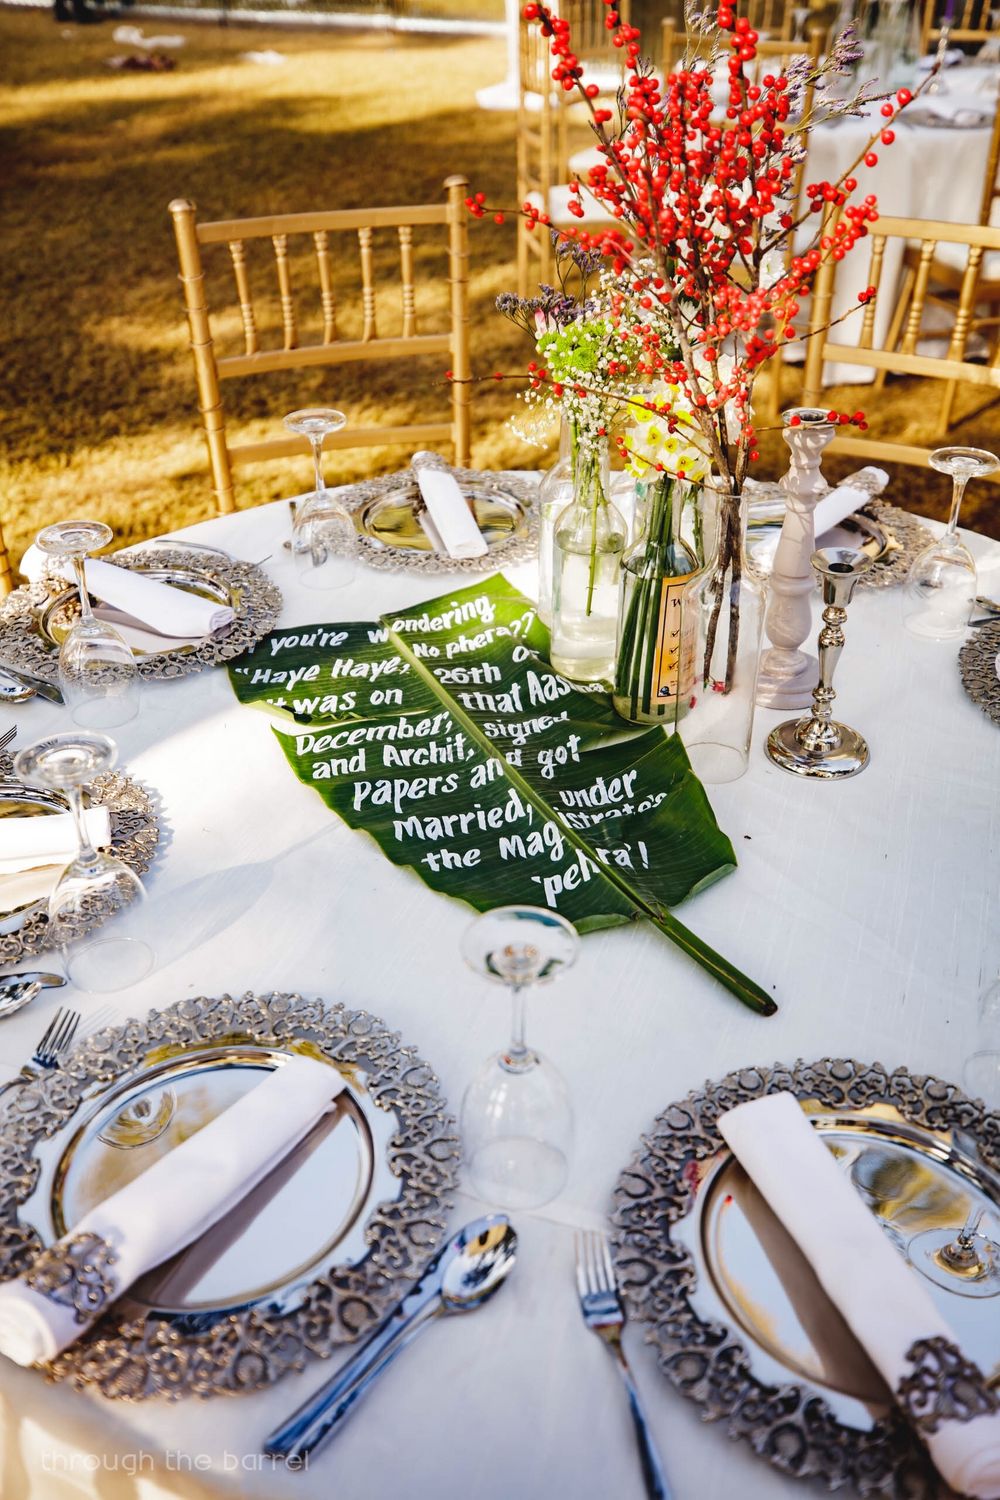 Photo of Unique table setting with handwritten note on banana leaf by couple